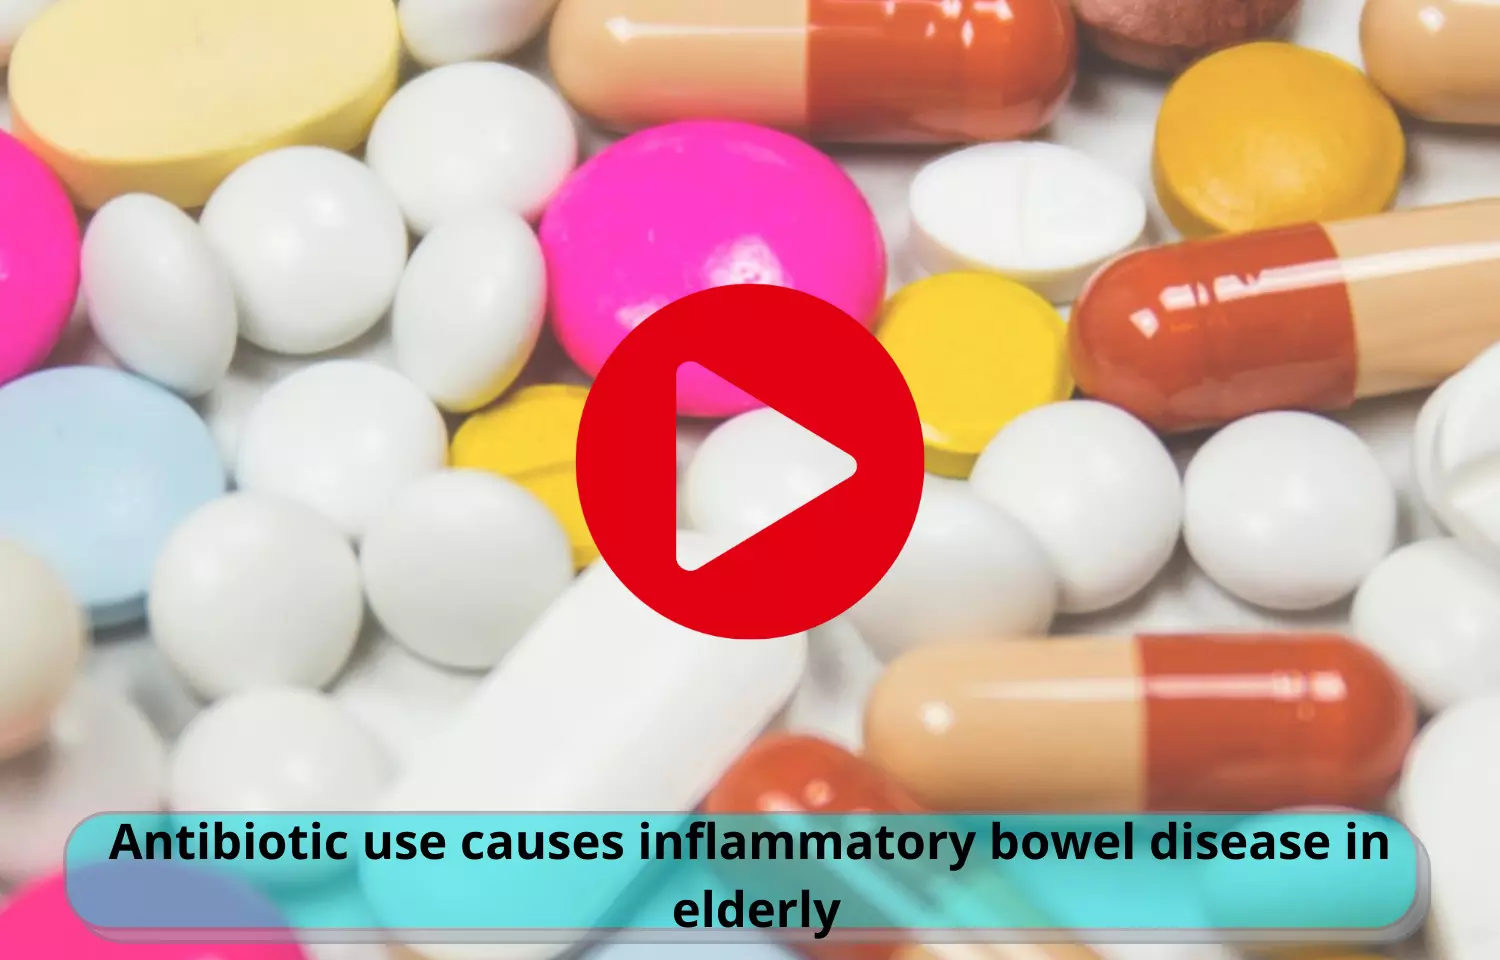 Antibiotic use a risk factor for inflammatory bowel disease in elderly